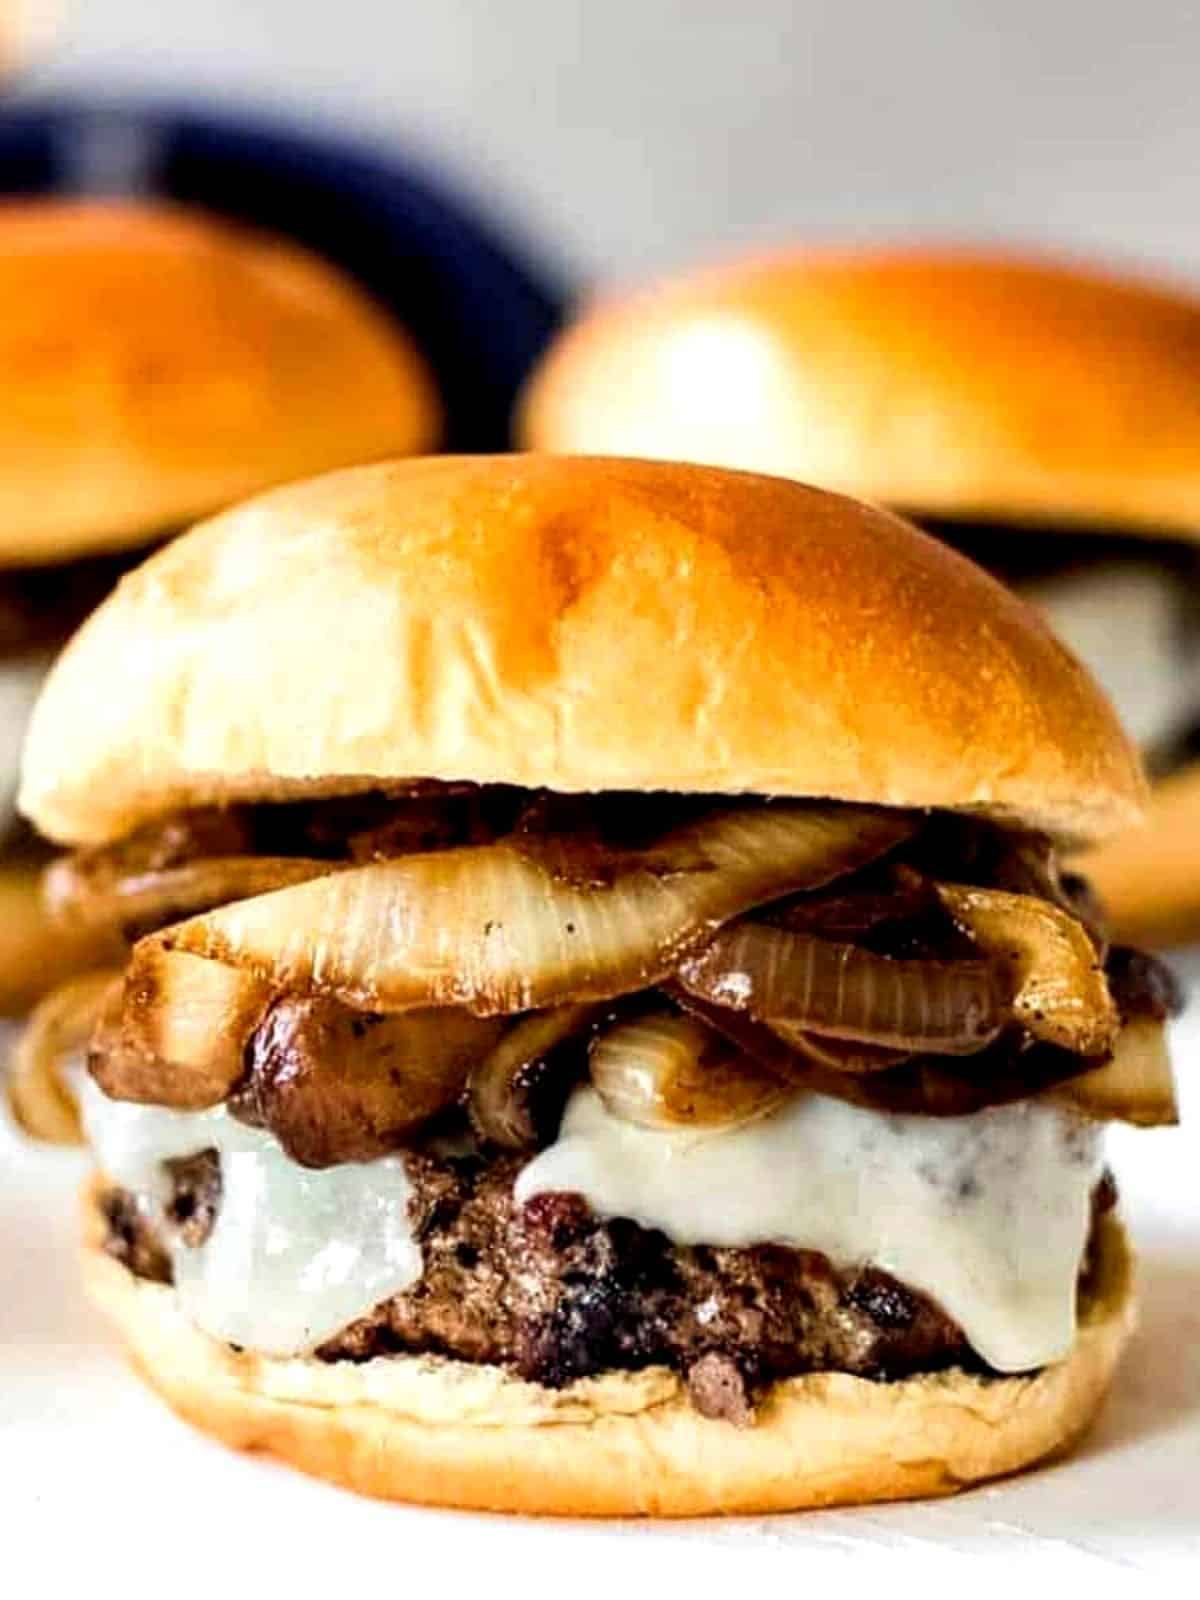 Burger on a bun with cheese and mushrooms.